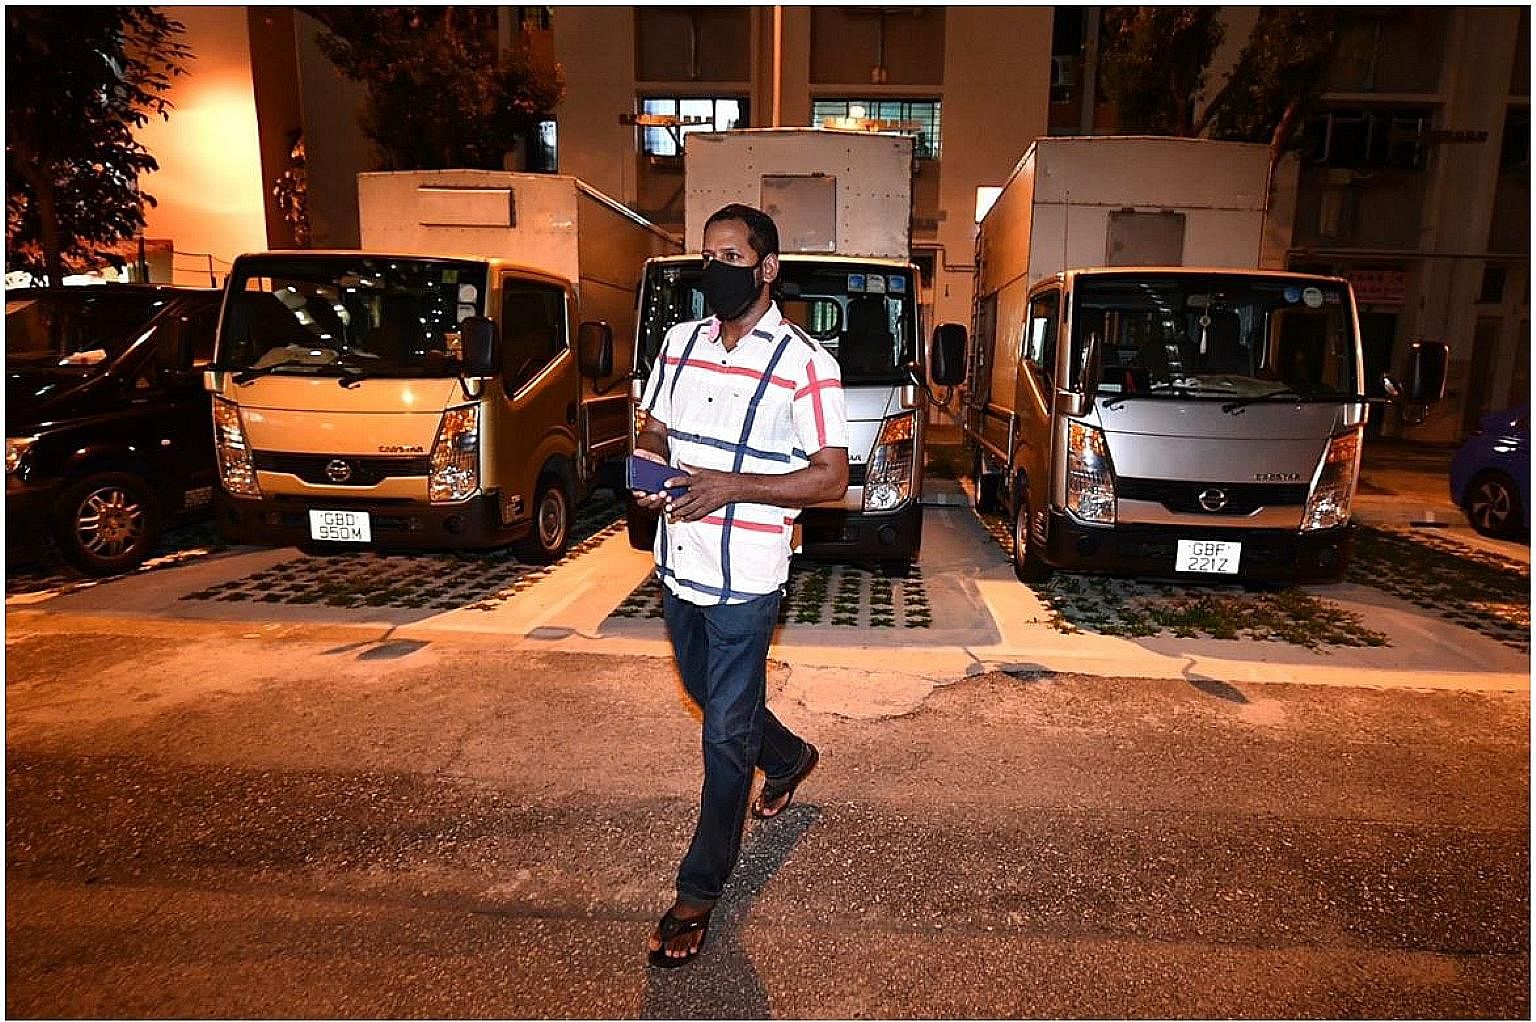 Mr Xavier Mathew, 45, who works for a florist, on the way to shop for groceries after midnight, as soon as his stay-home notice ended. He is among 85,000 foreign workers staying in flats, hotels and condominiums following measures to contain the spre